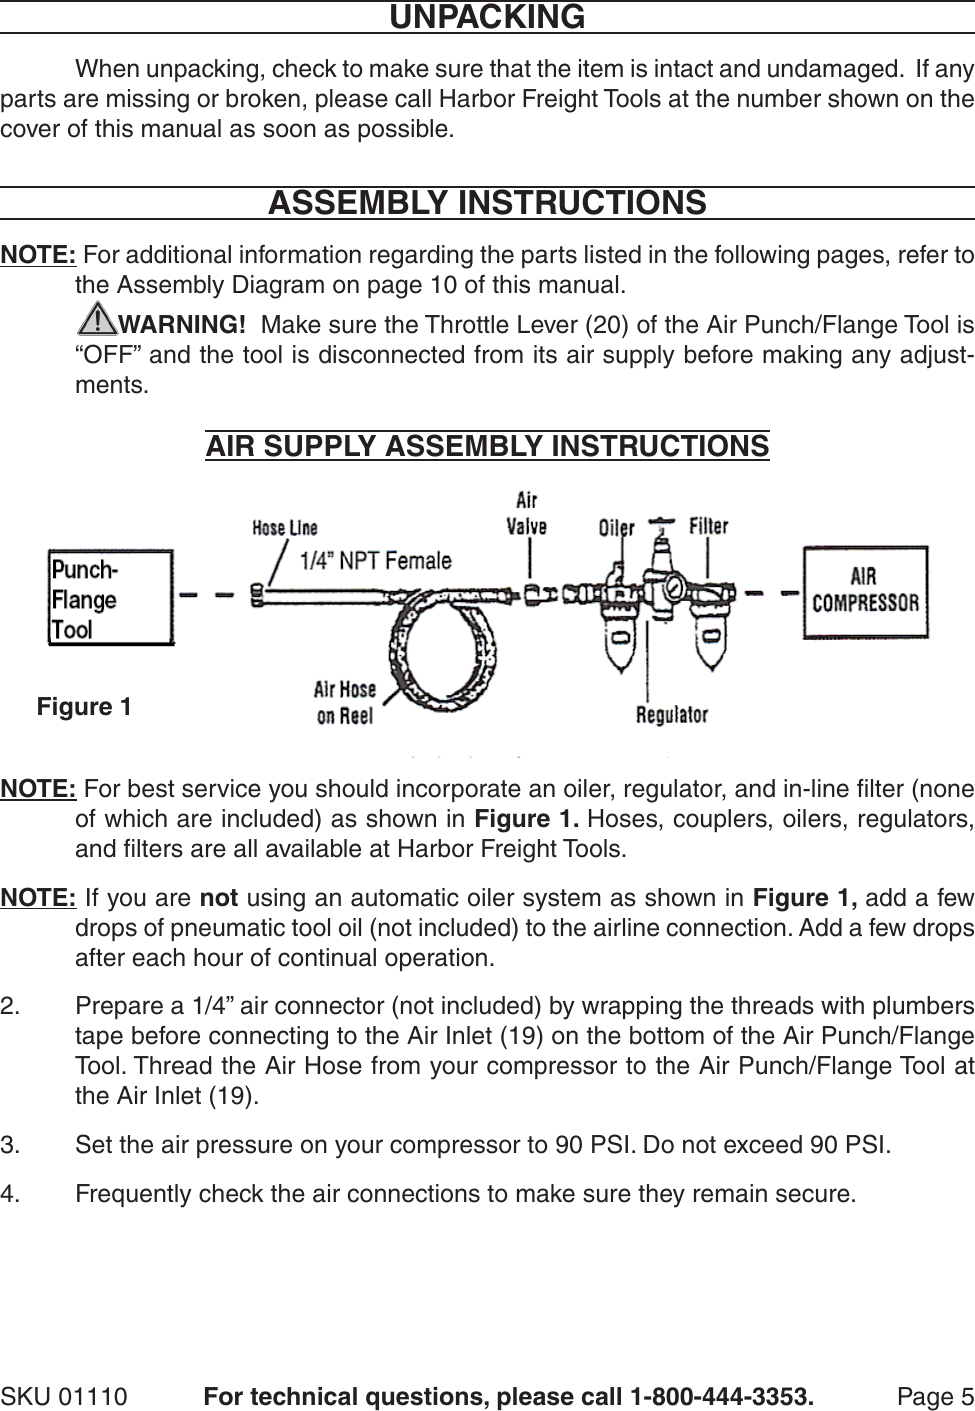 Page 5 of 11 - Harbor-Freight Harbor-Freight-Air-Punch-Flange-Tool-Product-Manual-  Harbor-freight-air-punch-flange-tool-product-manual